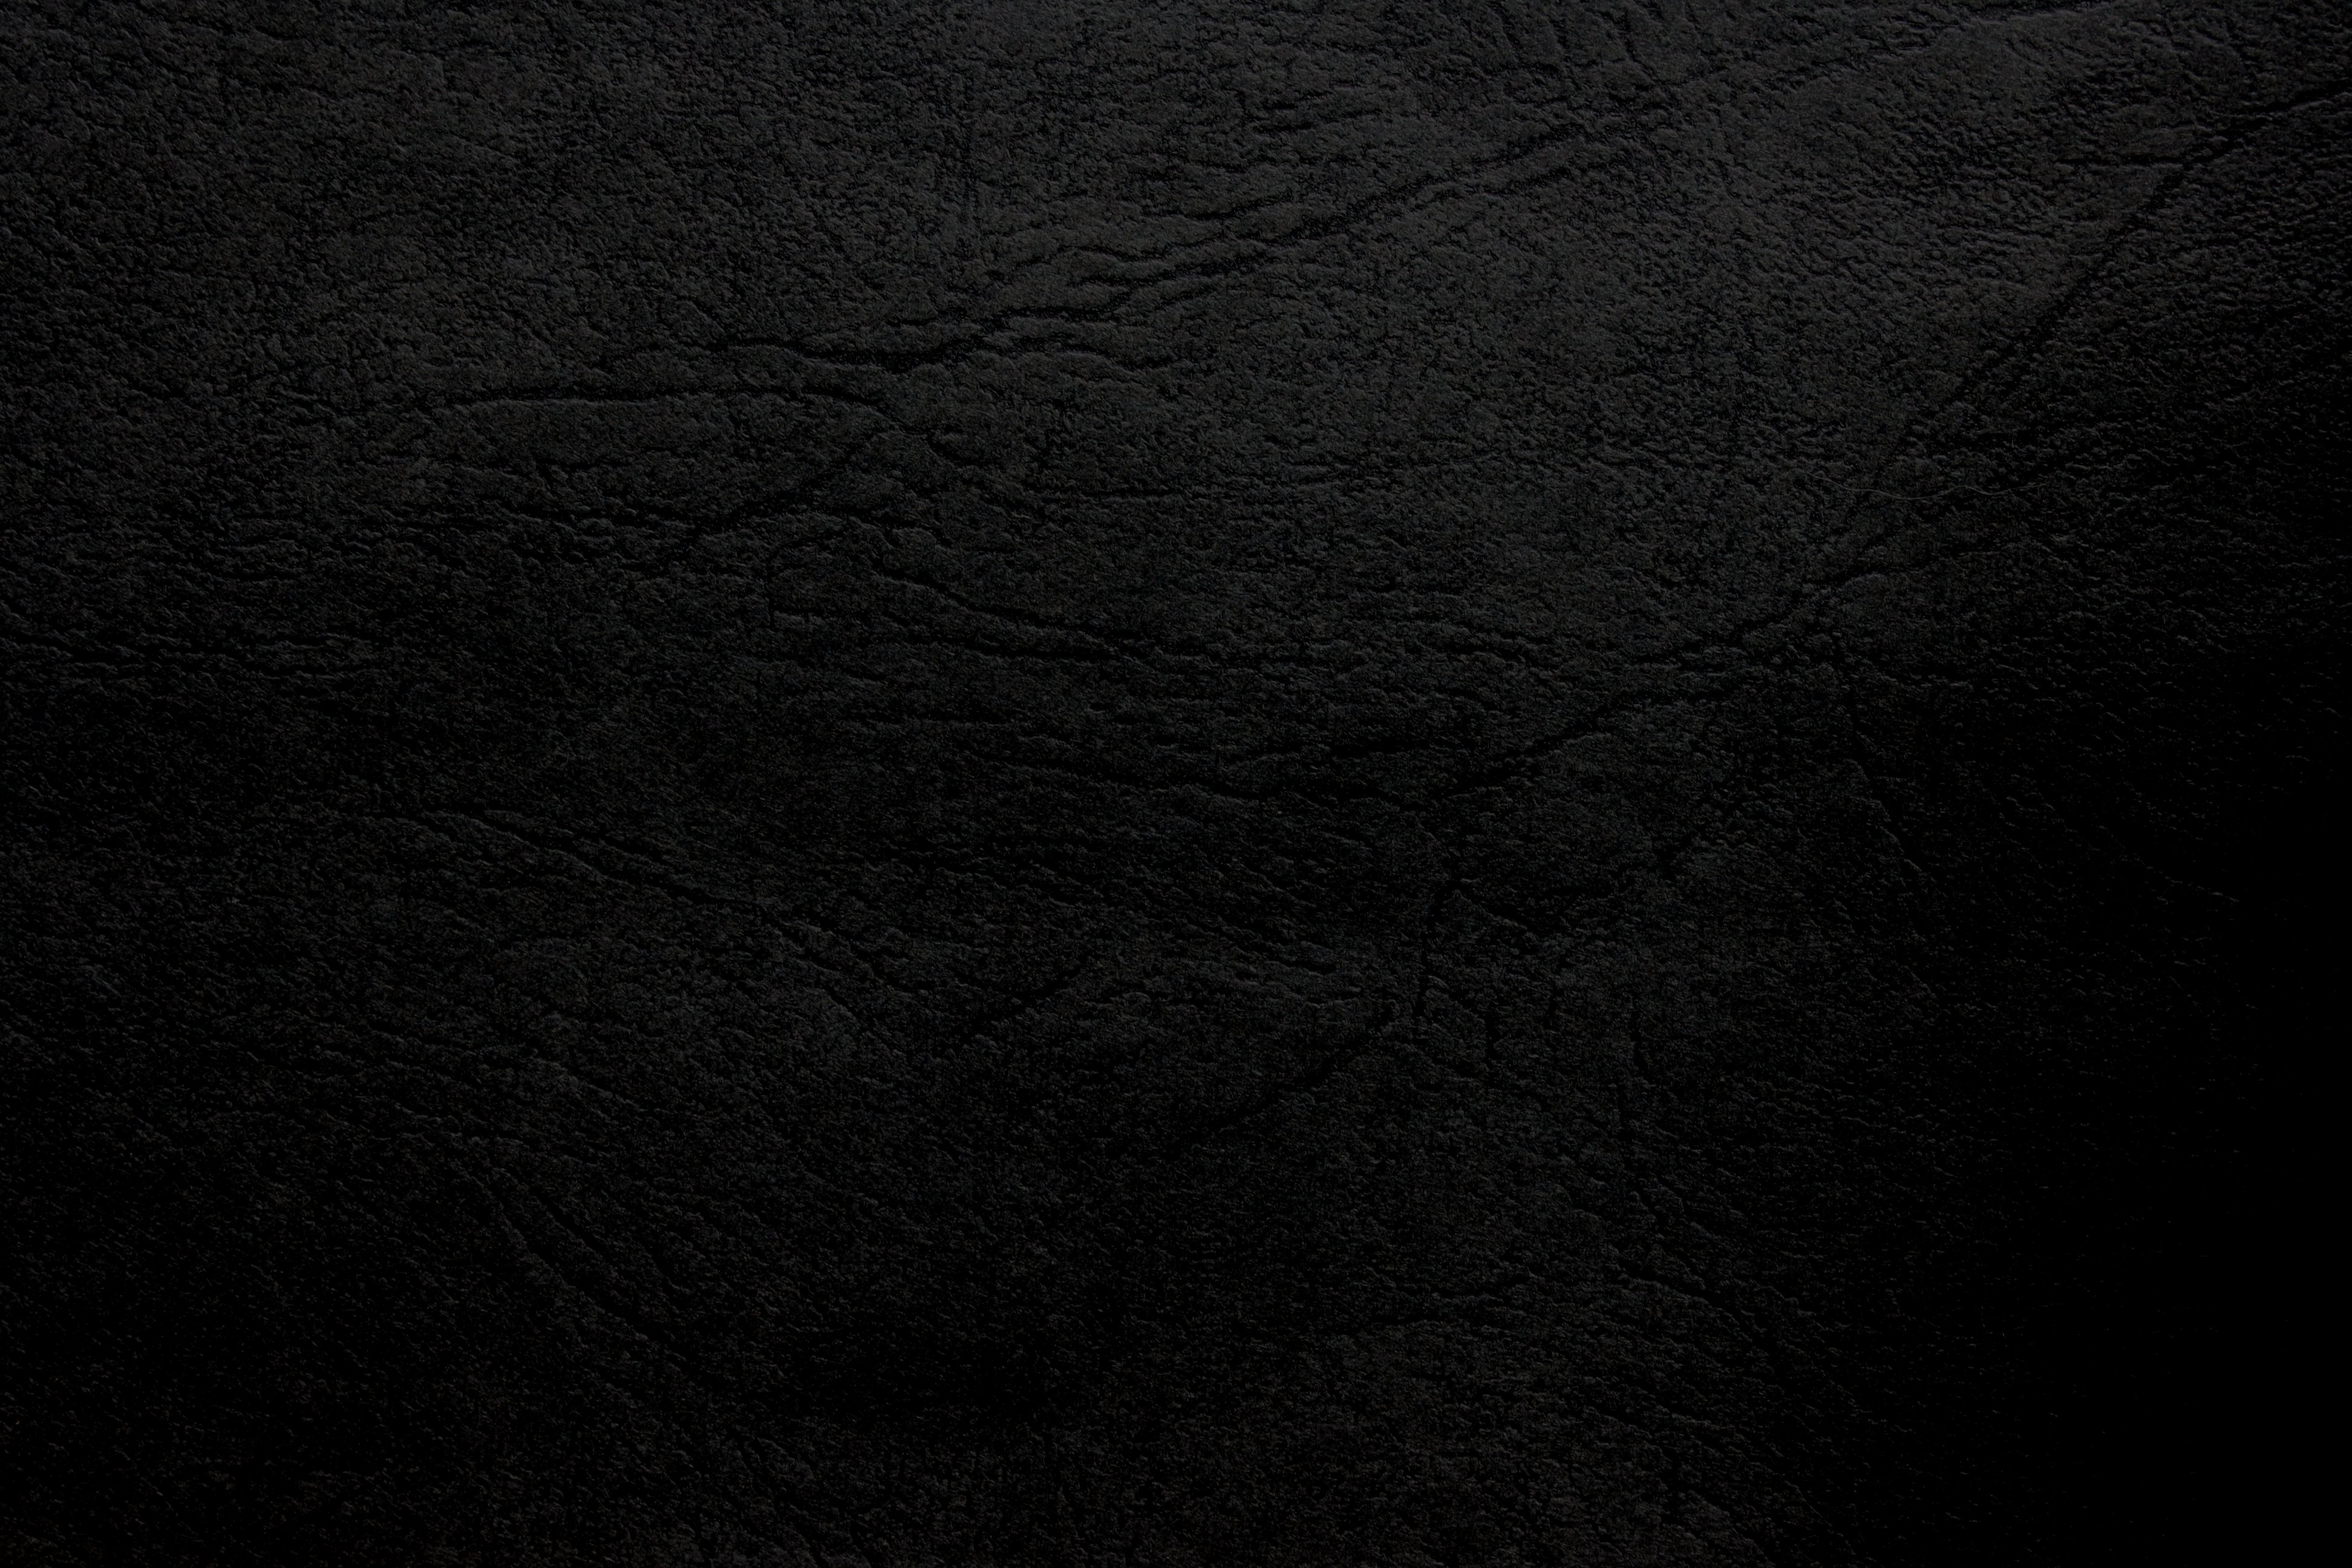 Black Leather Texture   Free High Resolution Photo   Dimensions 3888